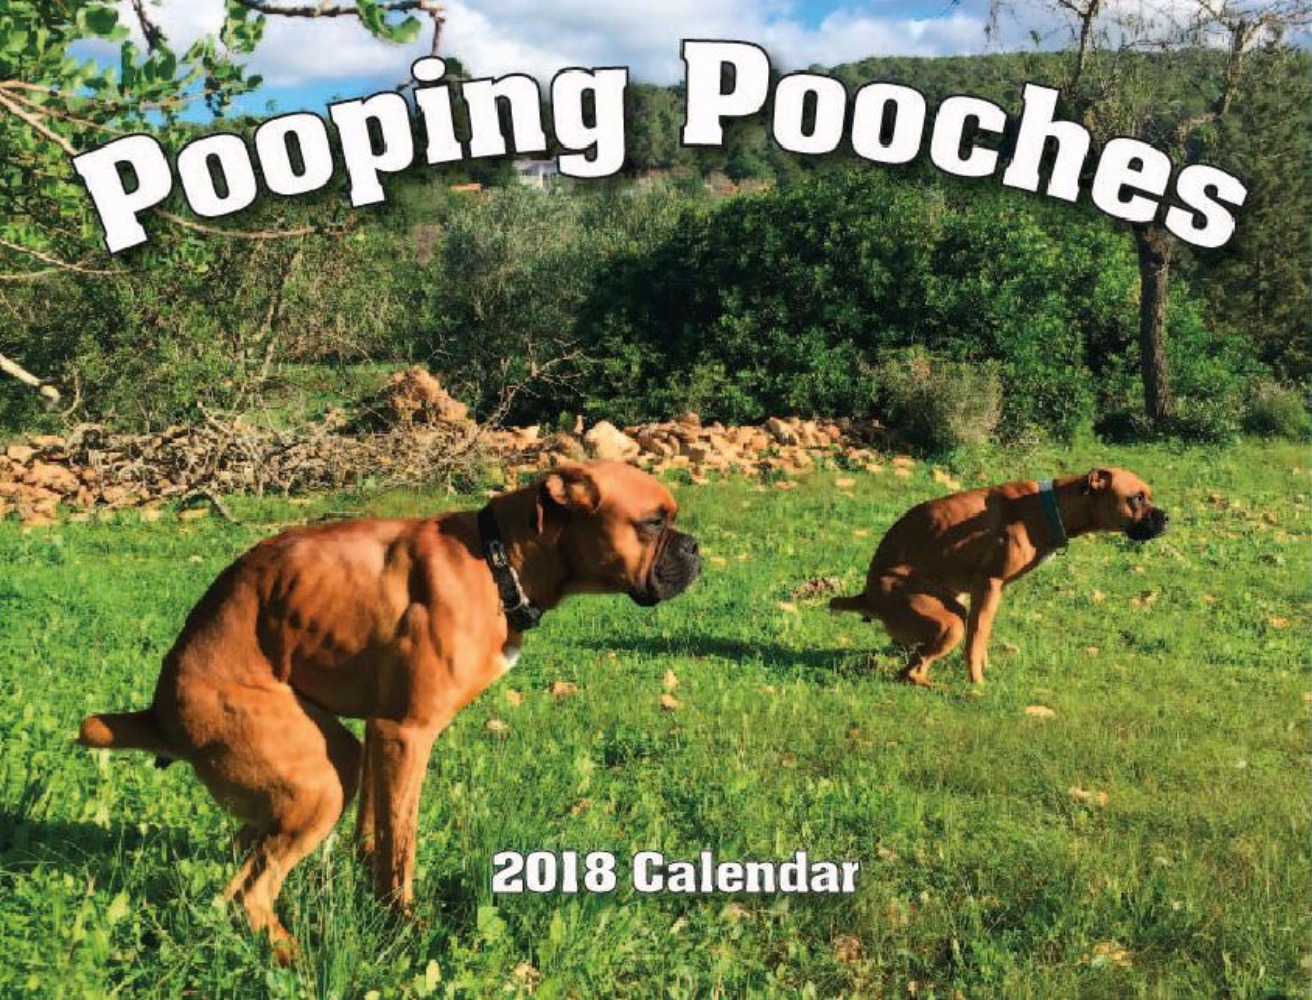 poopingpooches